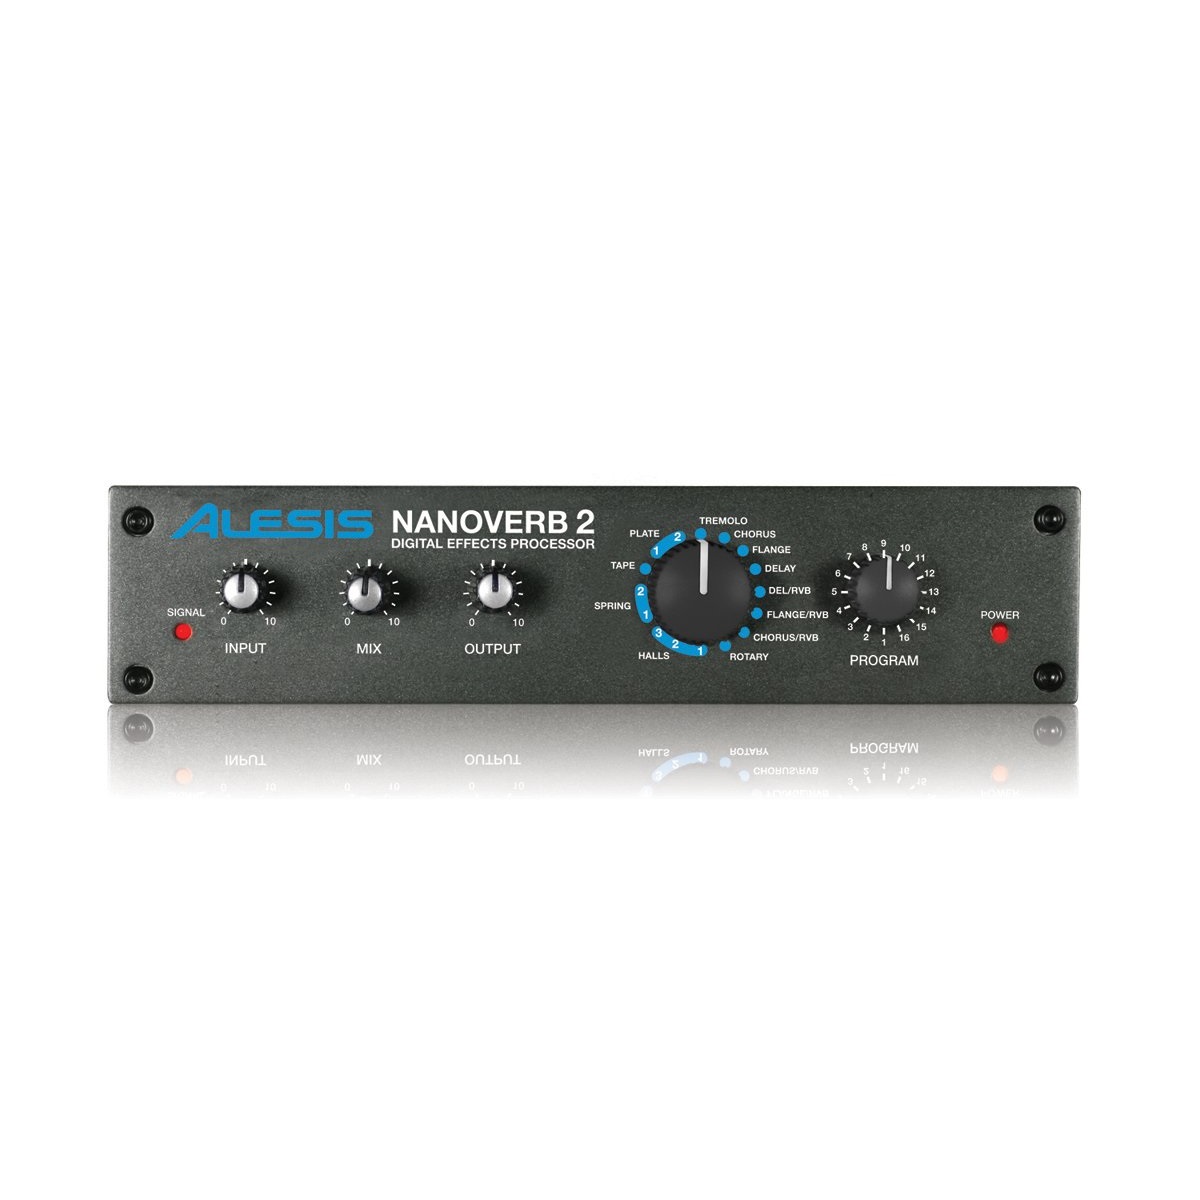 Alesis NanoVerb 2 - Digital Effects Processor online price in India